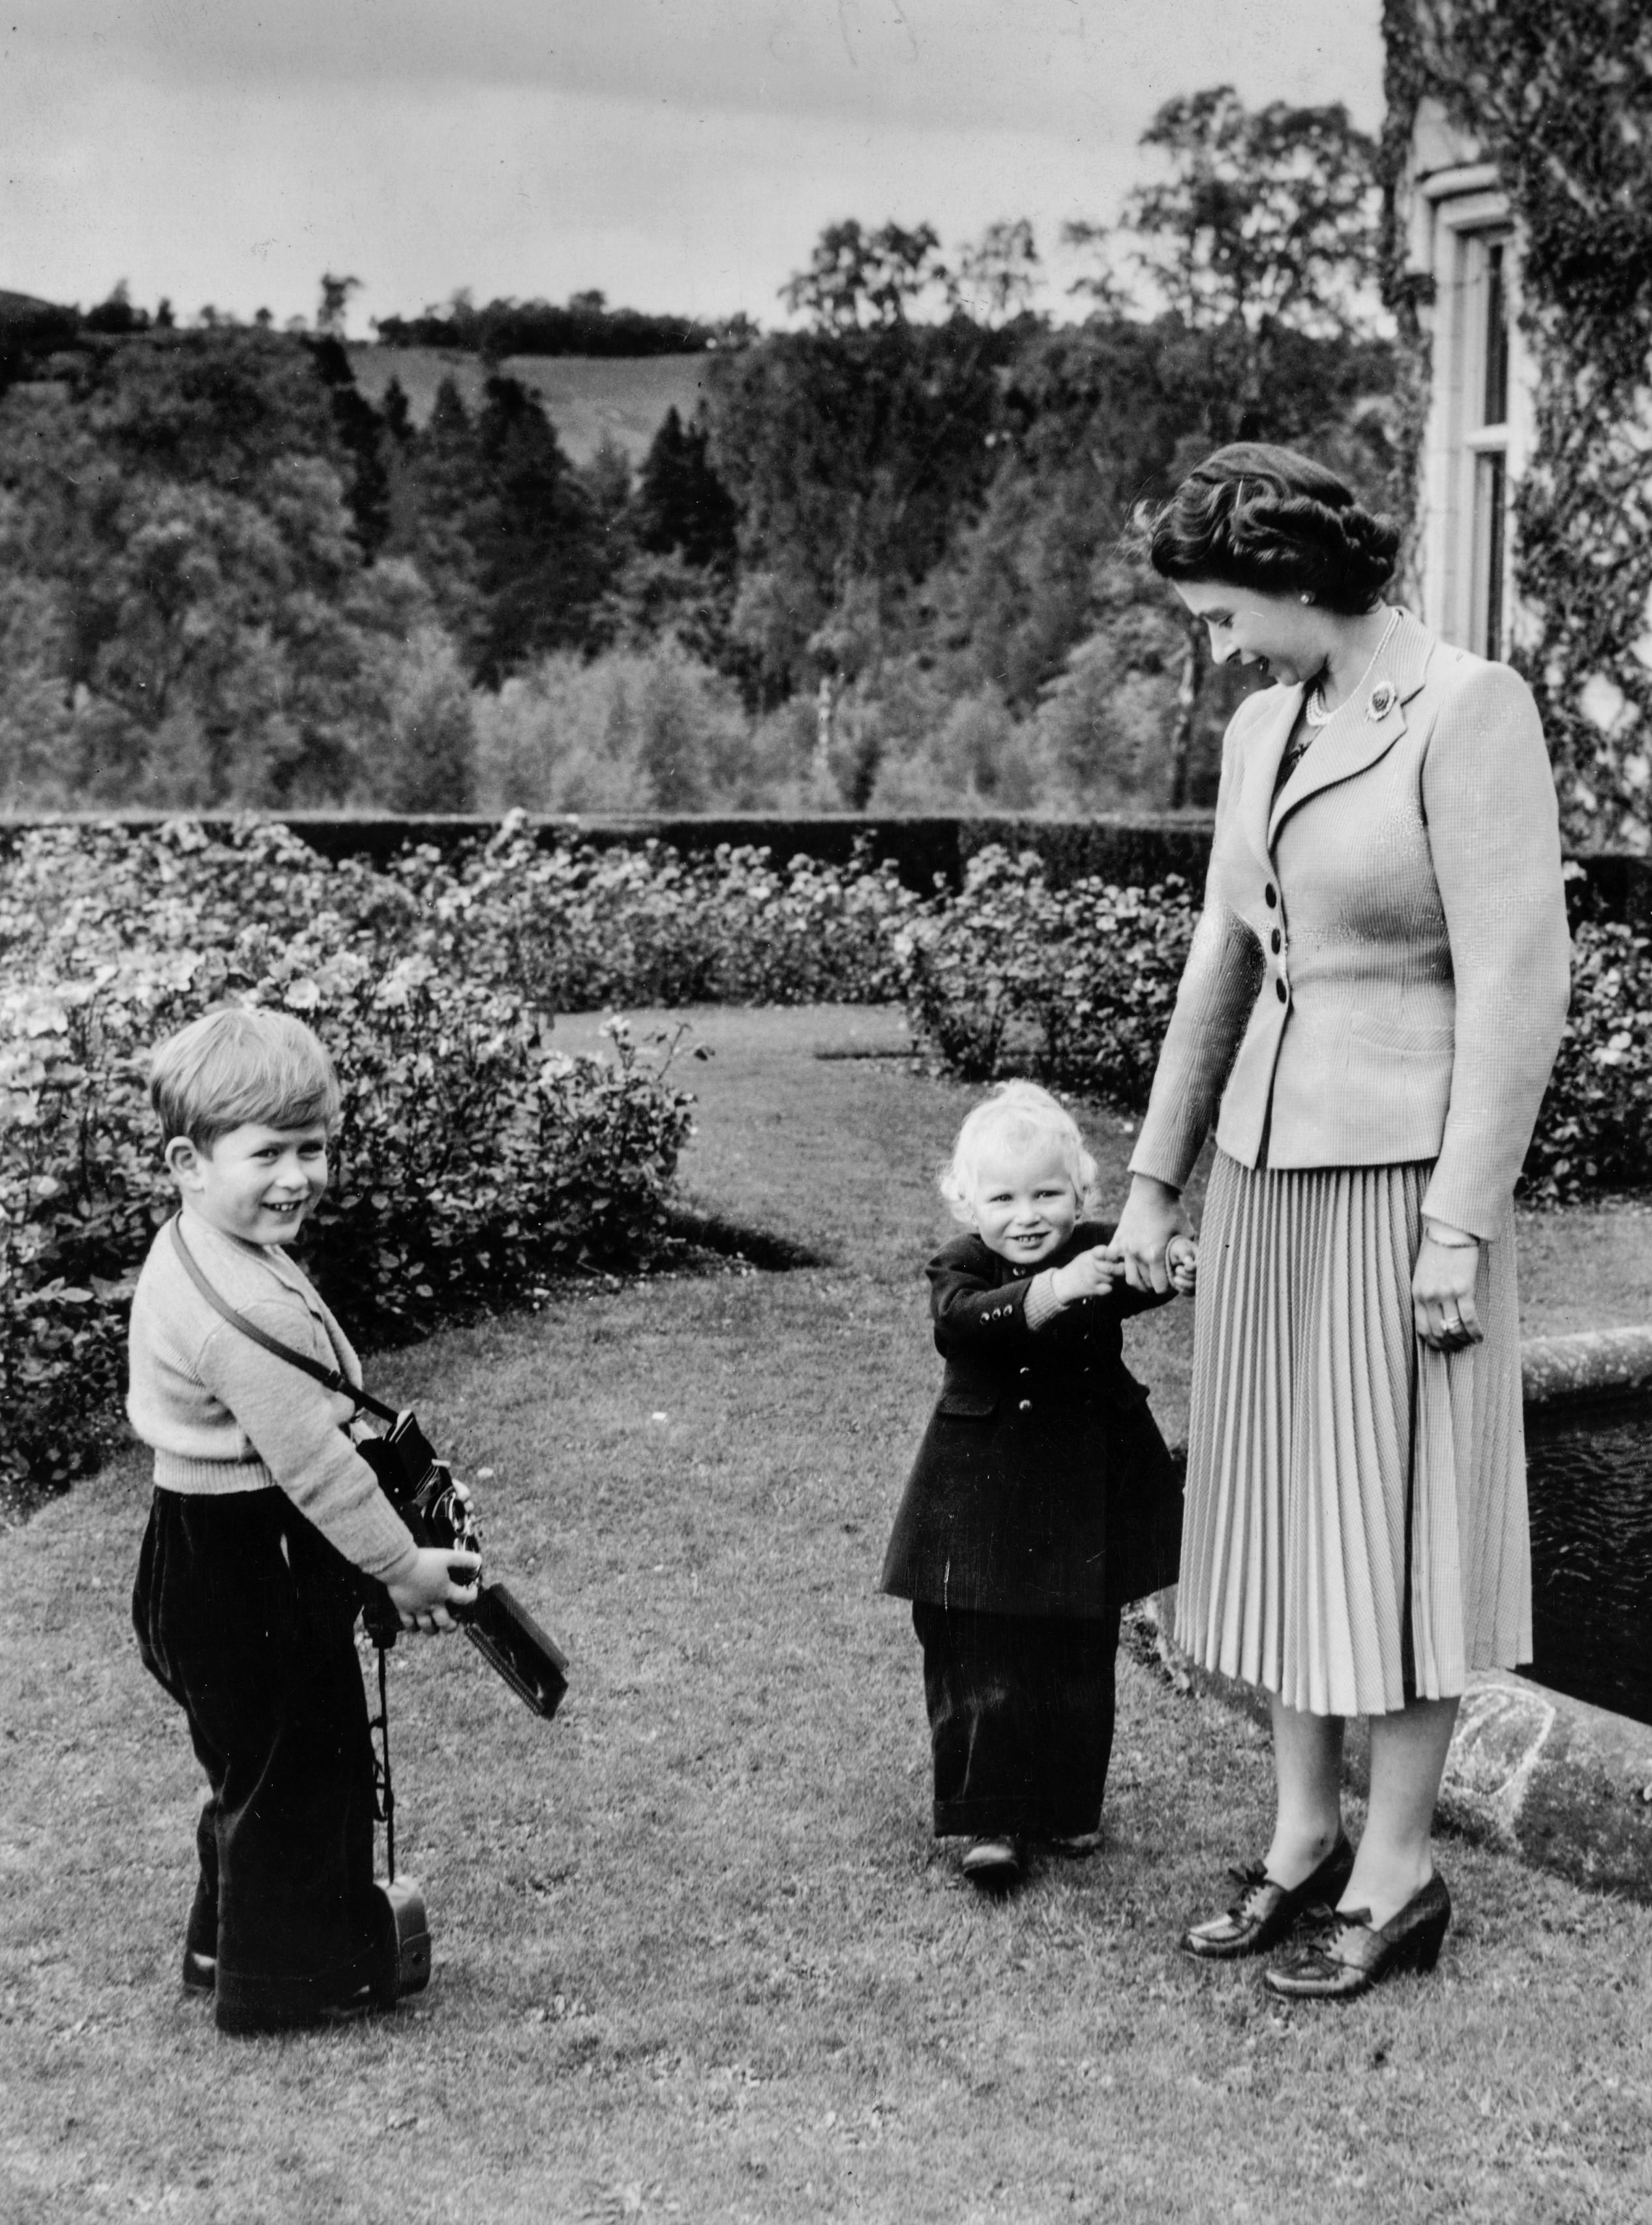 28th September 1952: Queen Elizabeth II plays with her children, Charles and Anne in the grounds of Balmoral Castle, Scotland